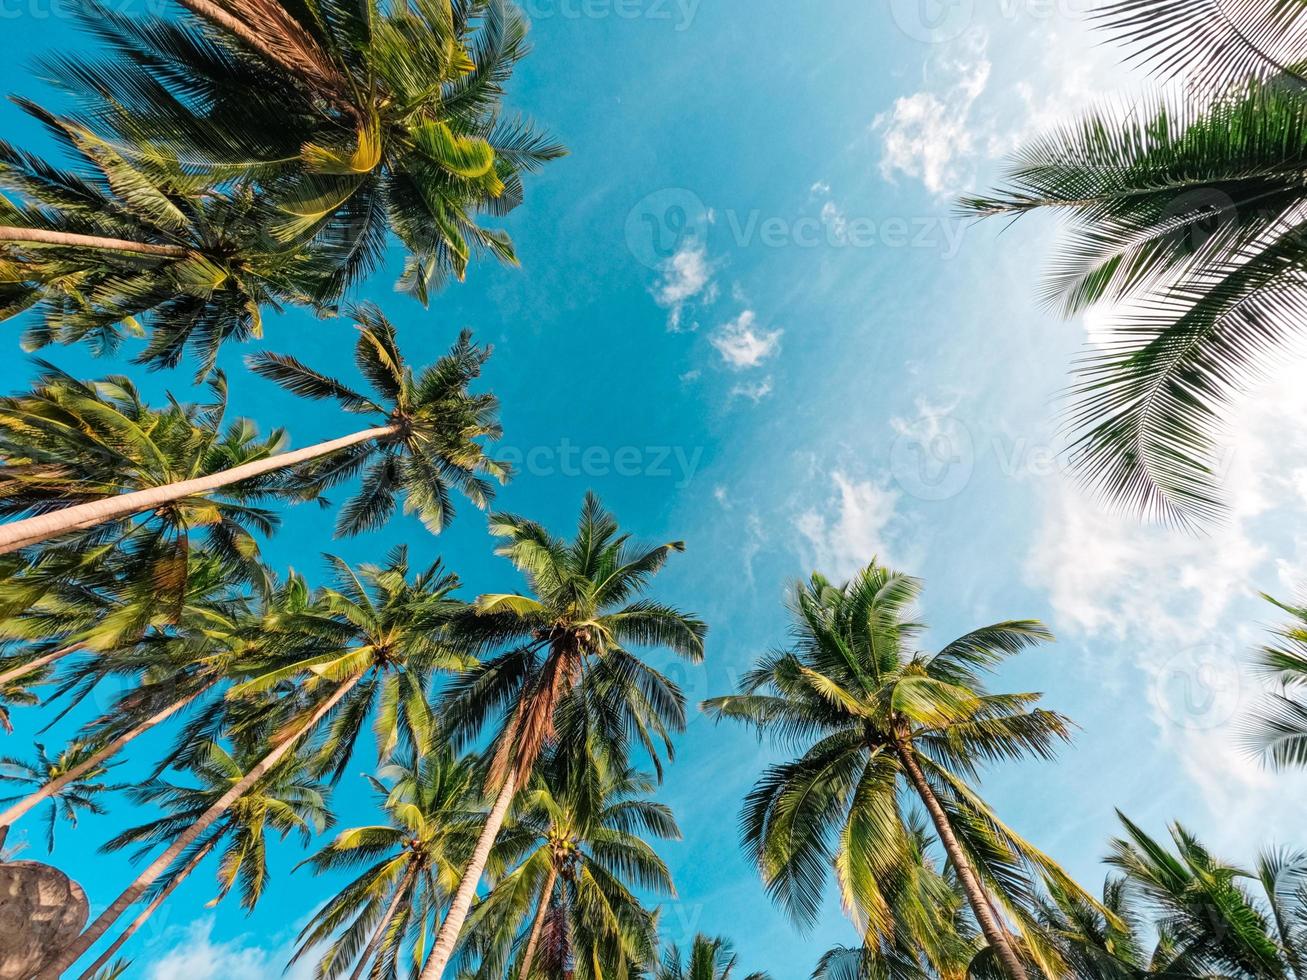 Beaches and coconut palms on a tropical island photo